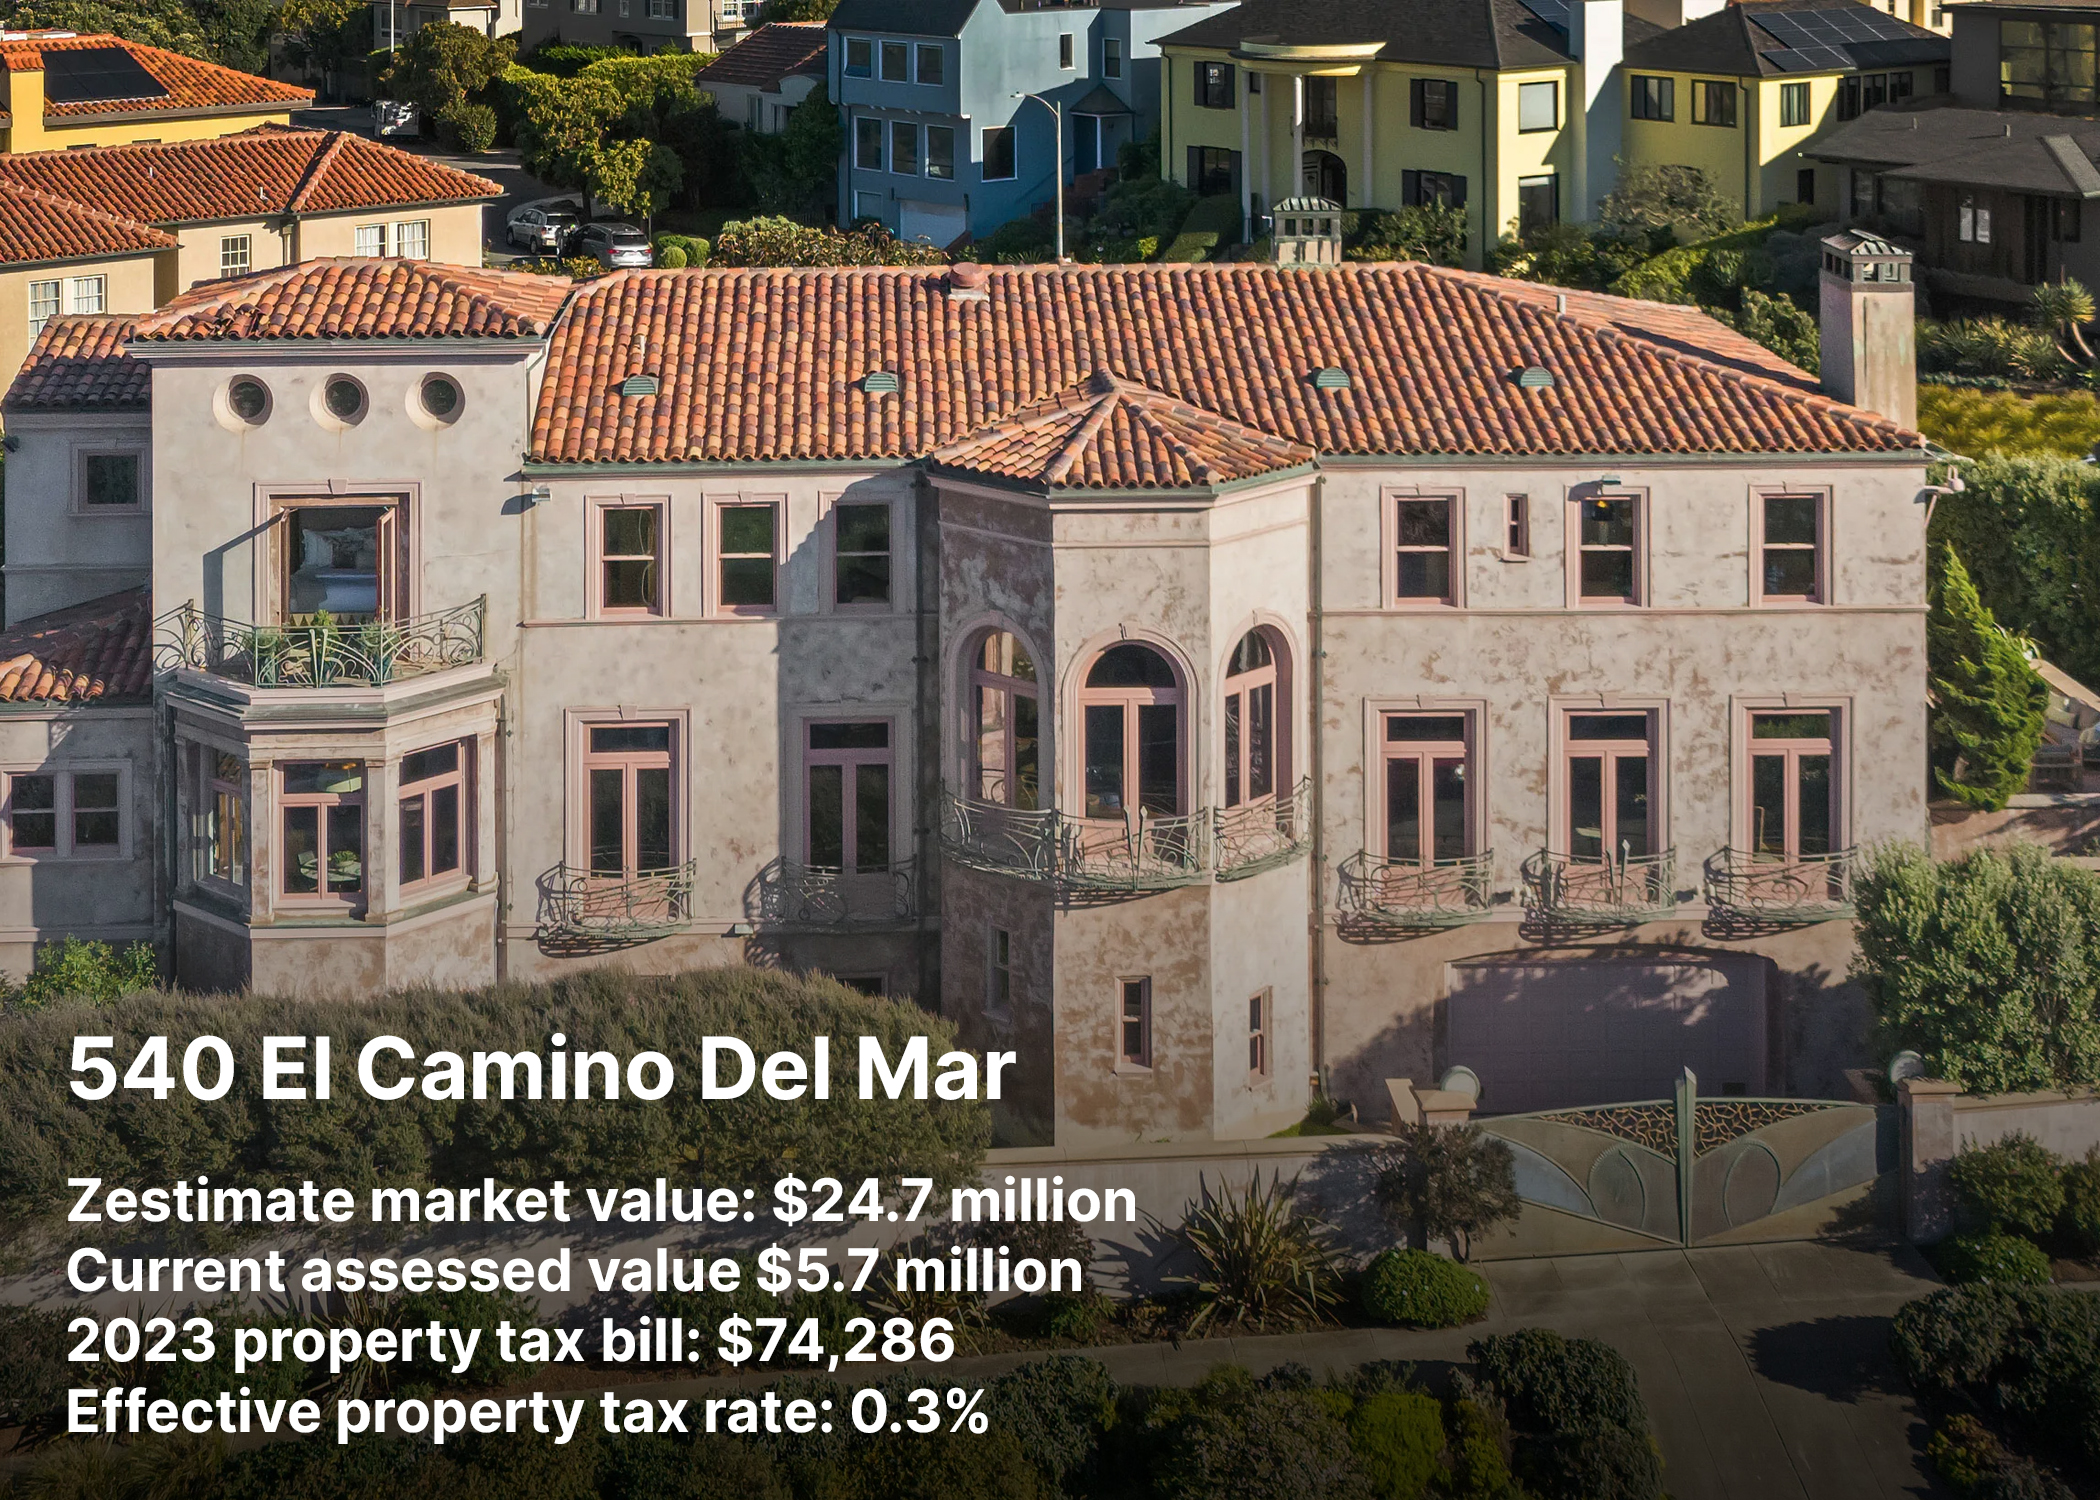 The image shows a large, elegant house with a terracotta roof and ornate balconies. Its address is 540 El Camino Del Mar, and it includes property value and tax details.